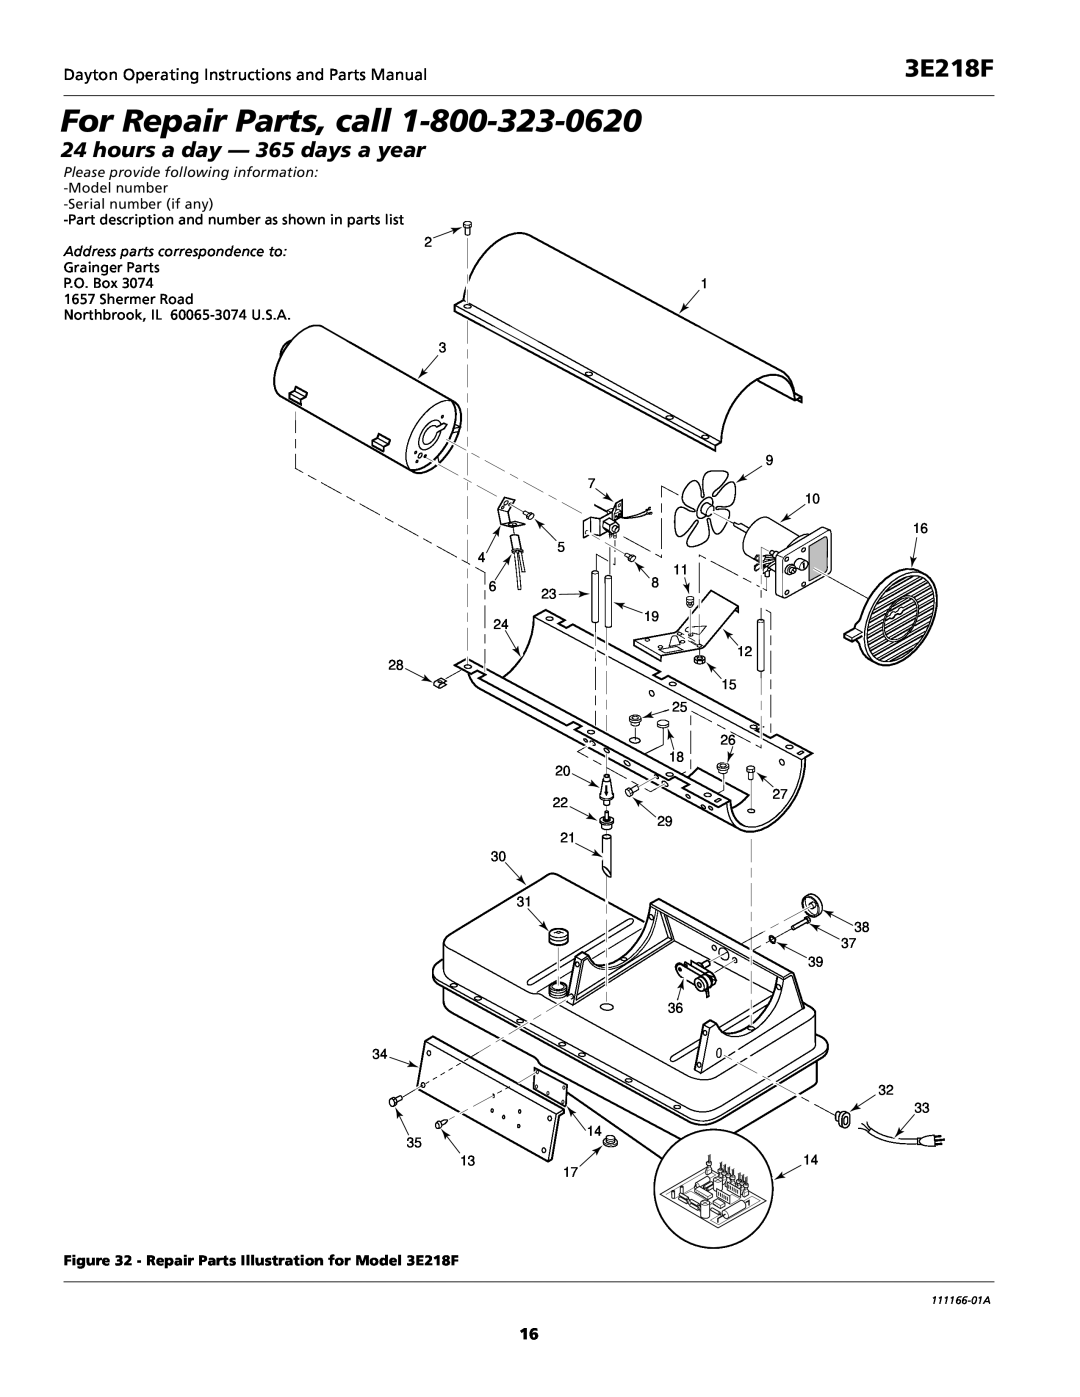 Dayton 5S1792 For Repair Parts, call, hours a day - 365 days a year, Repair Parts Illustration for Model 3E218F 